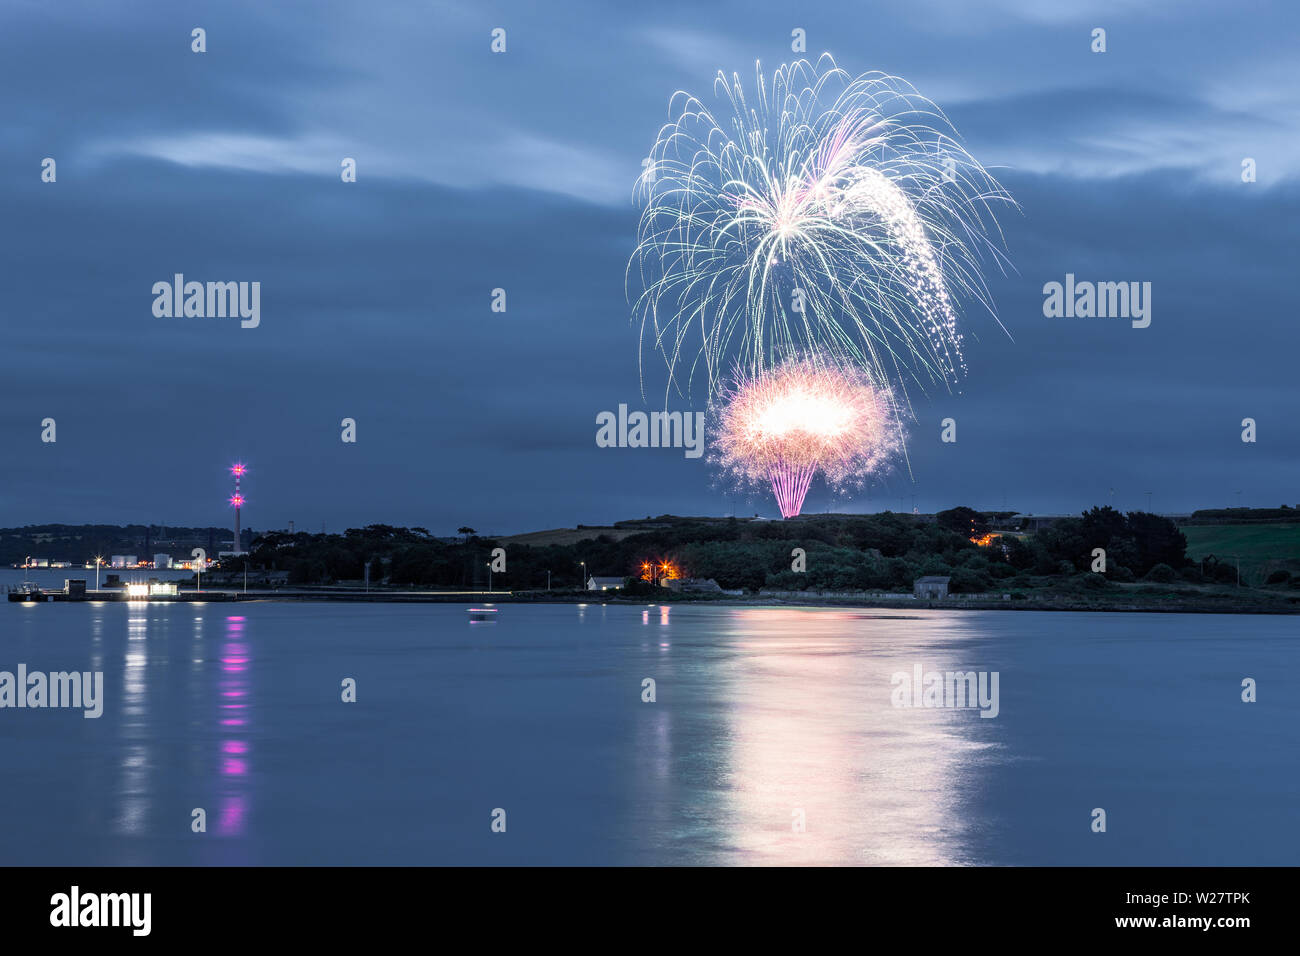 Spike Island, Cork, Ireland. 06th July, 2019. A spectacular Fireworks display lights the night sky over Spike Island, Cork, Ireland where the lives of the prisoners who died on the Island was marked. The display is part of a celebration to mark the 81st anniversary of the handover of the island from Britain to Ireland in 1938 and comes as management say they are on track to host over 70,000 visitors this year due to new exhibitions and the delivery of a 126 seater ferry. Credit: David Creedon/Alamy Live News Stock Photo